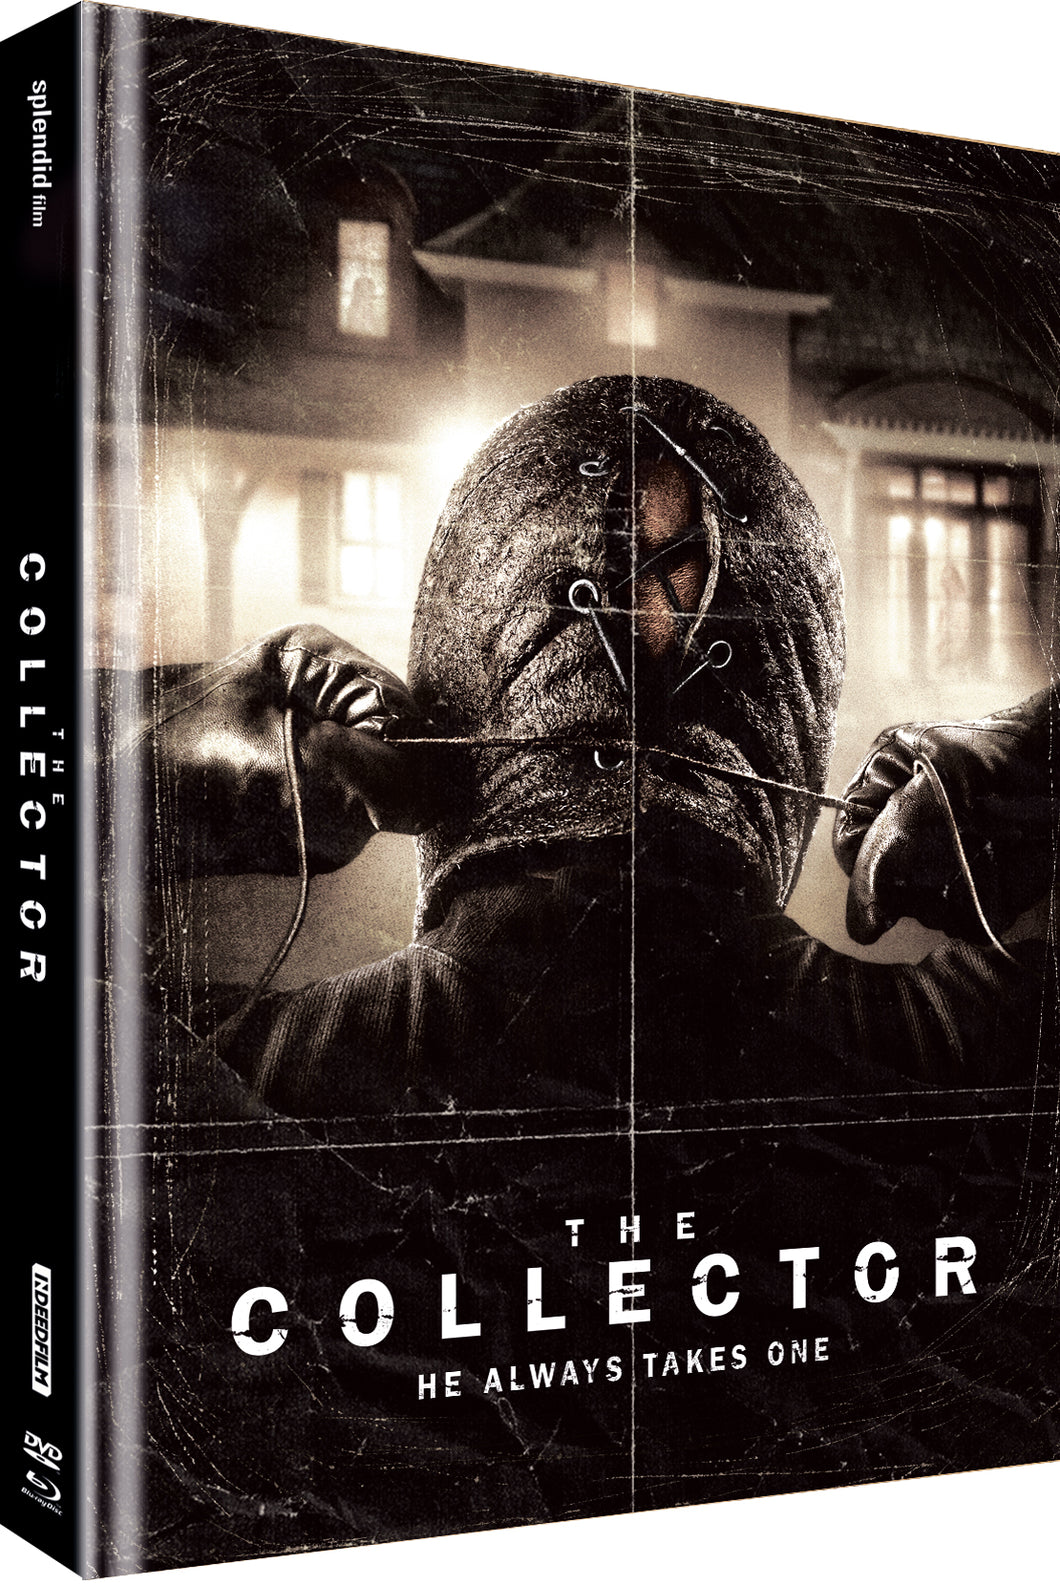 PRE-SALE: THE COLLECTOR - 2-Disc Limited UNCUT Collector’s Edition im Mediabook COVER B- lim 666 - RELEASE DATE: 29th Sept